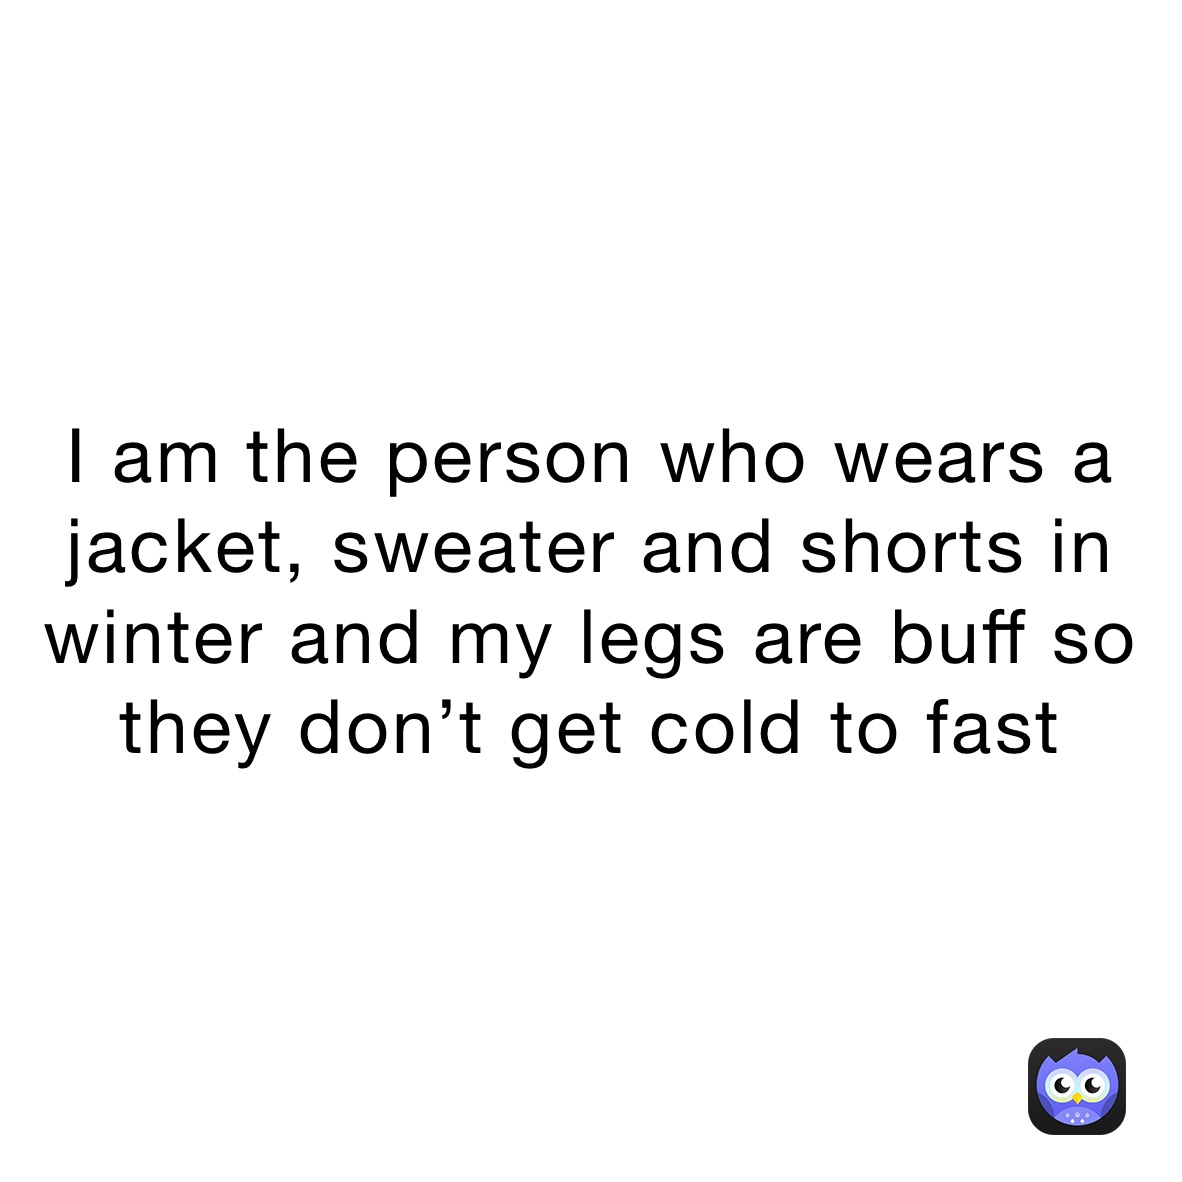 I am the person who wears a jacket, sweater and shorts in winter and my legs are buff so they don’t get cold to fast 